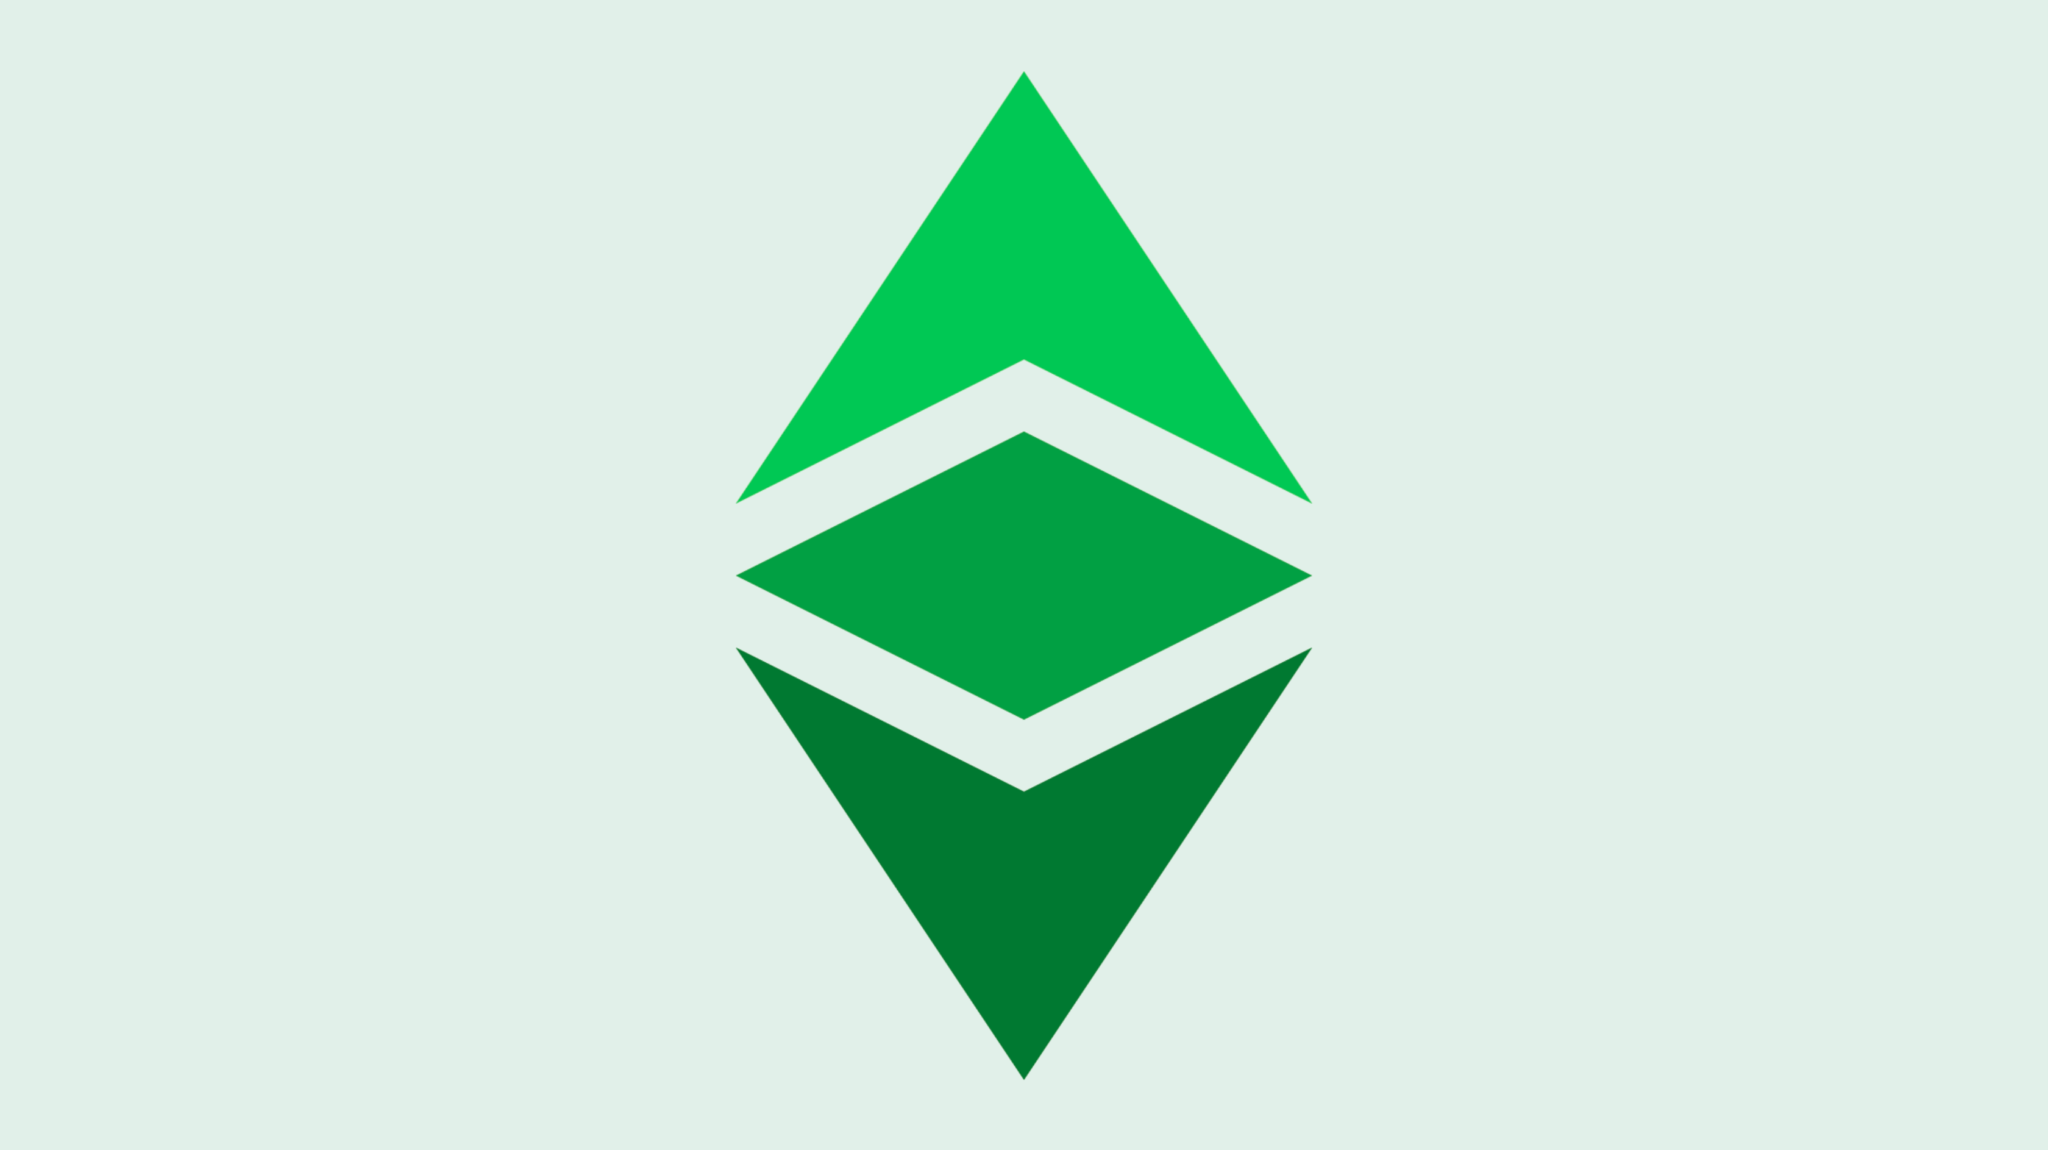 Ethereum classic talk podcast difference between normal currency and cryptocurrency